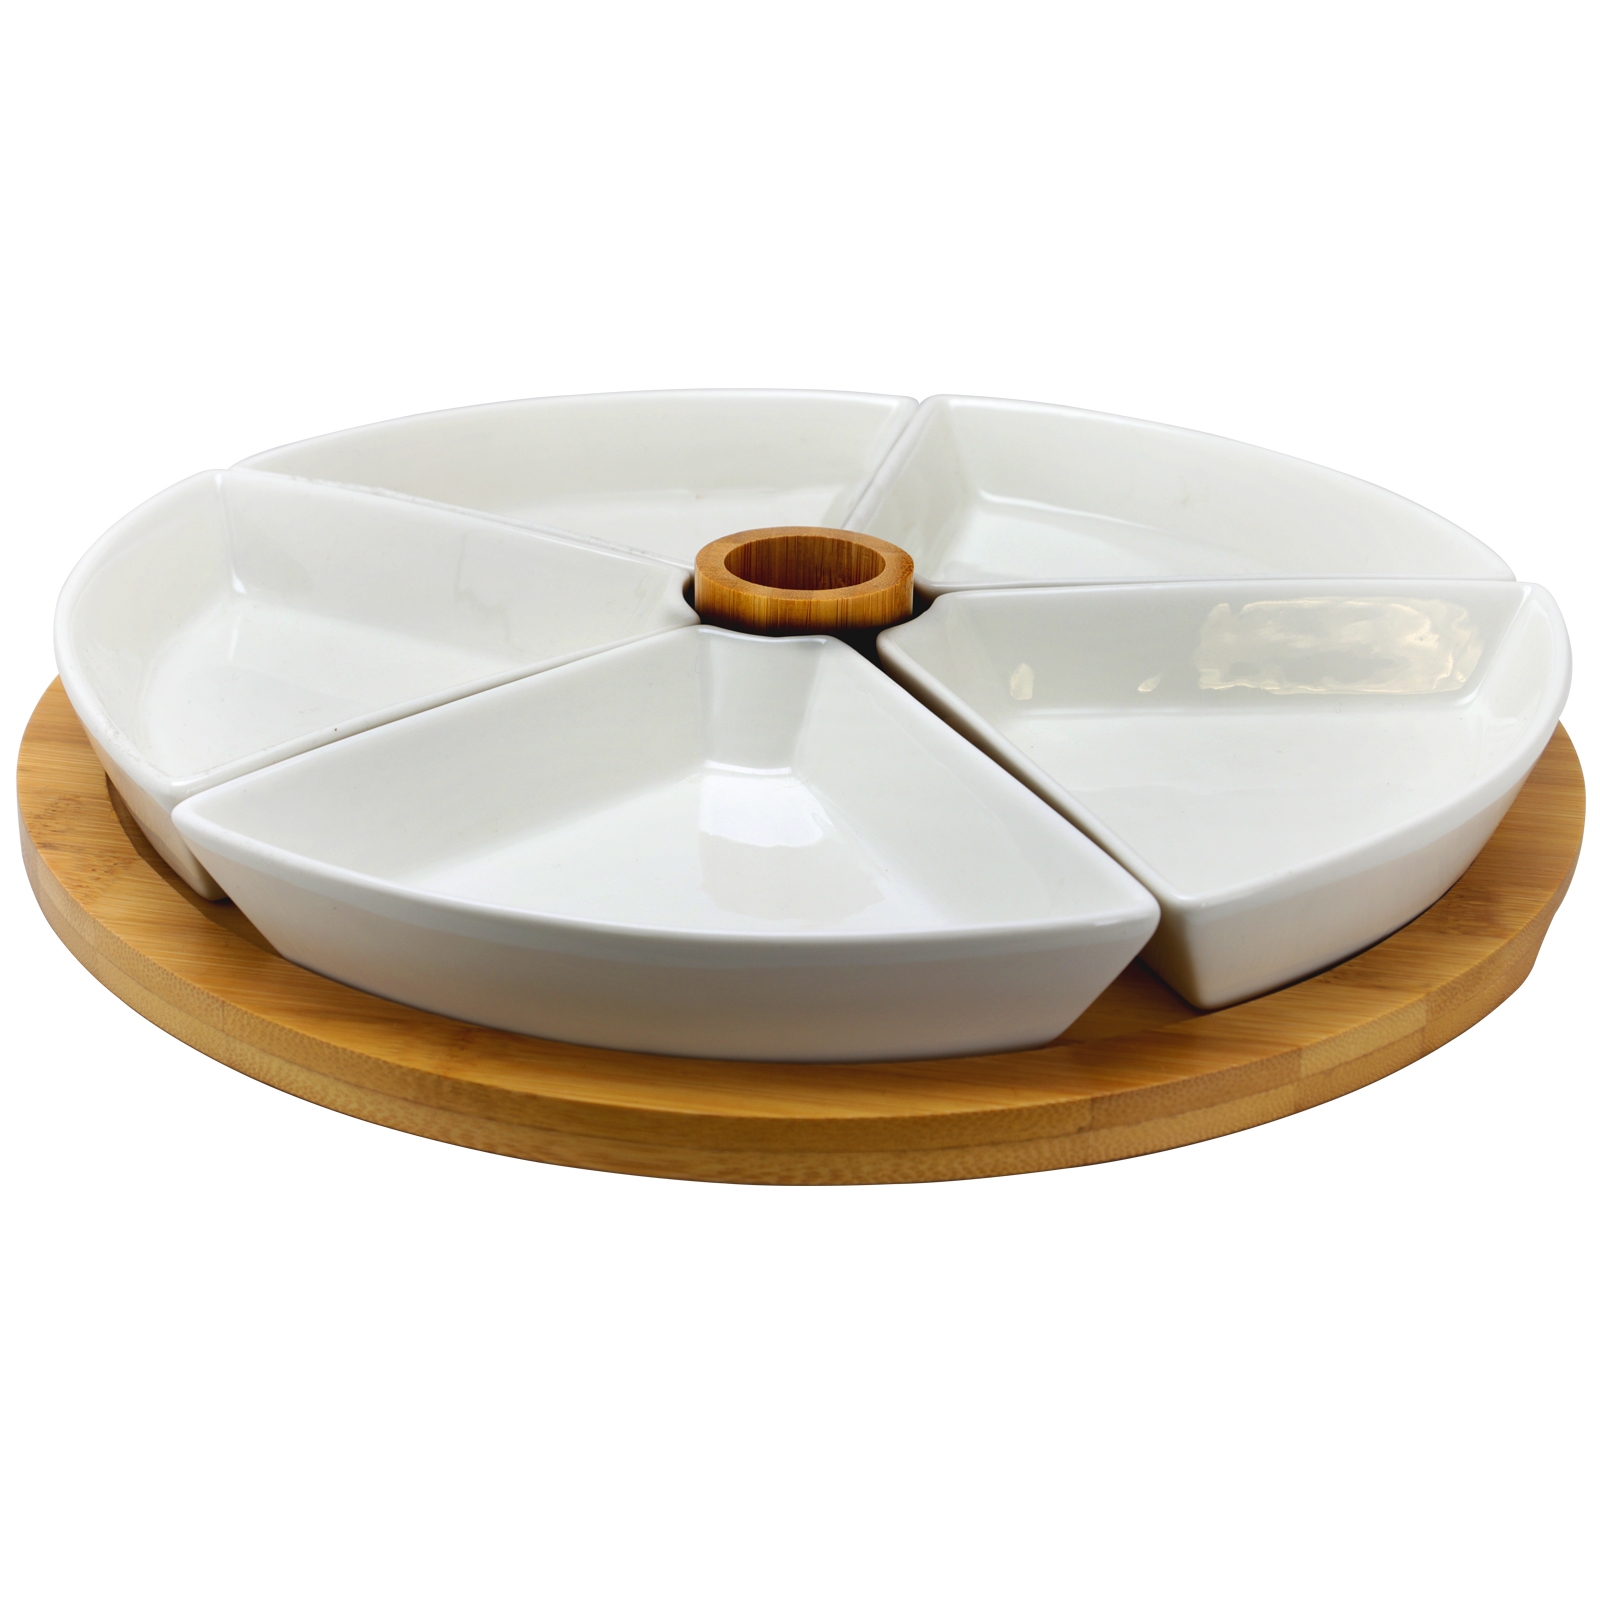 Elama Signature 7 Piece Appetizer Serving Set in White with Bamboo Serving Tray - image 5 of 5